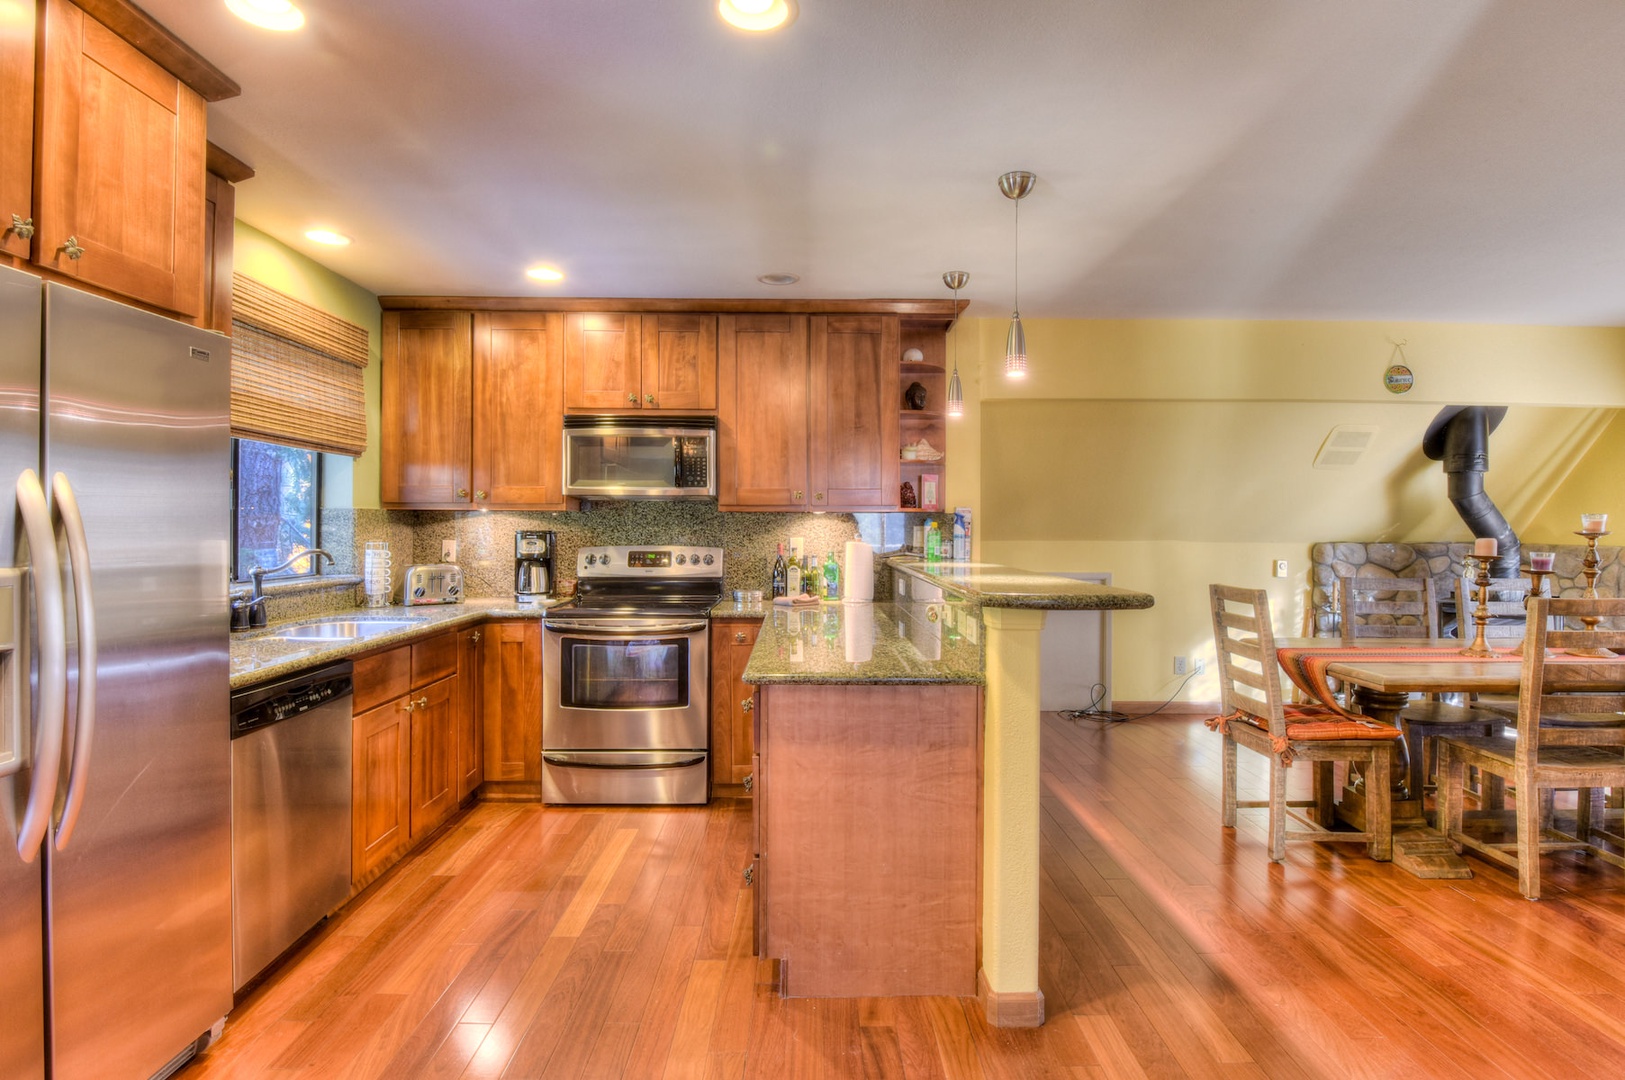 Fully equipped kitchen w/ modern appliances